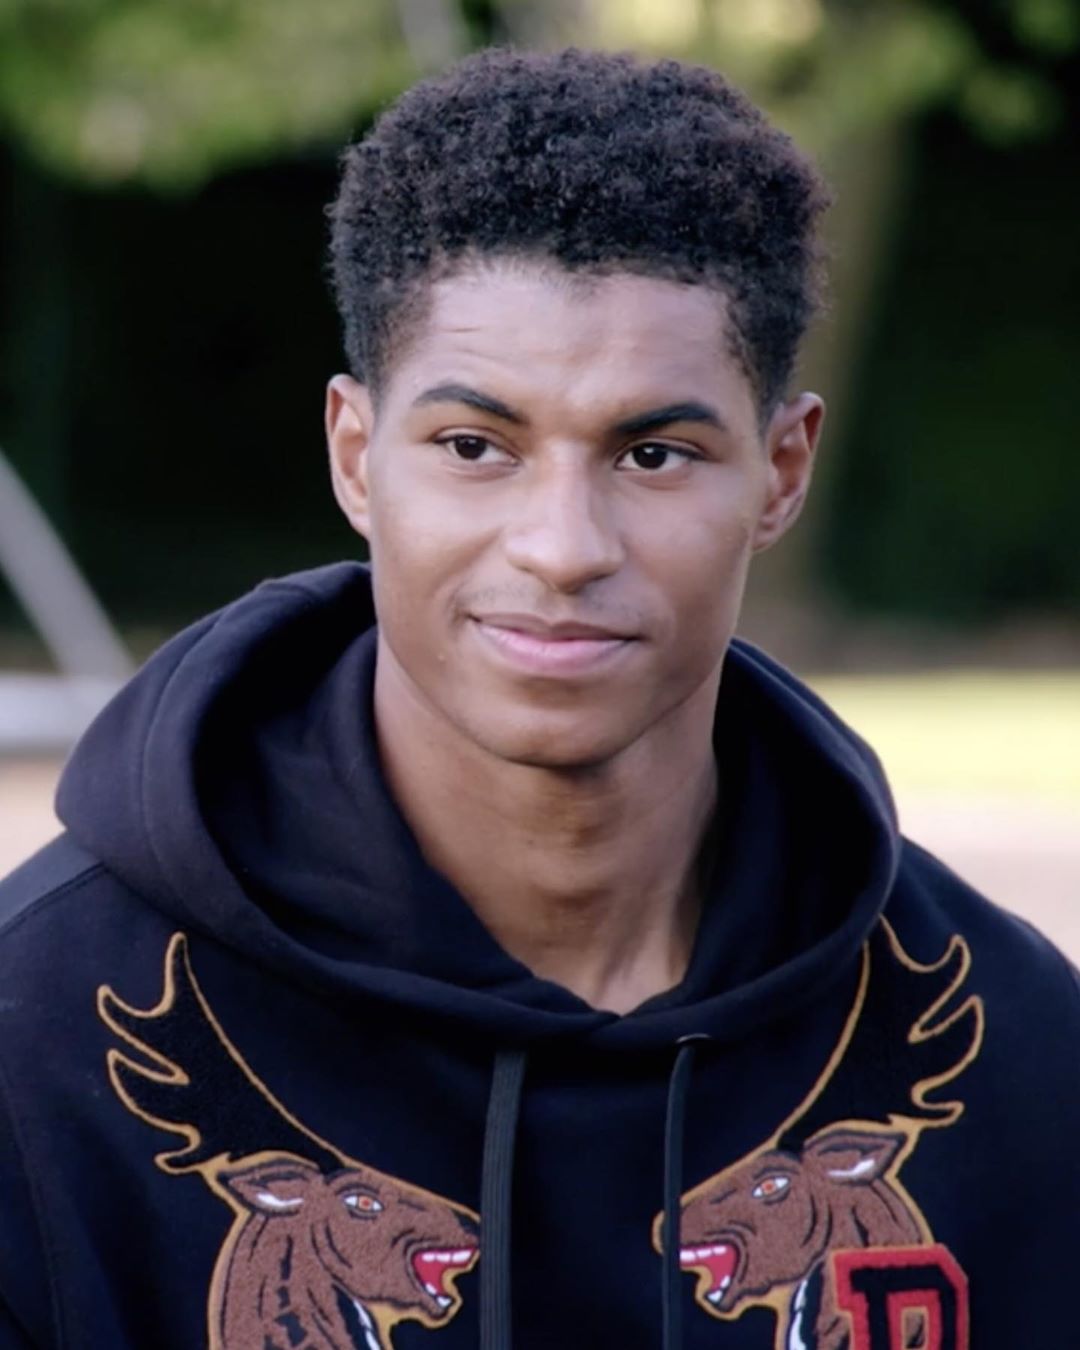 Burberry - Congratulations @MarcusRashford on receiving an MBE in recognition for your services to vulnerable children during Covid-19
. 
#InBurberry #Burberry